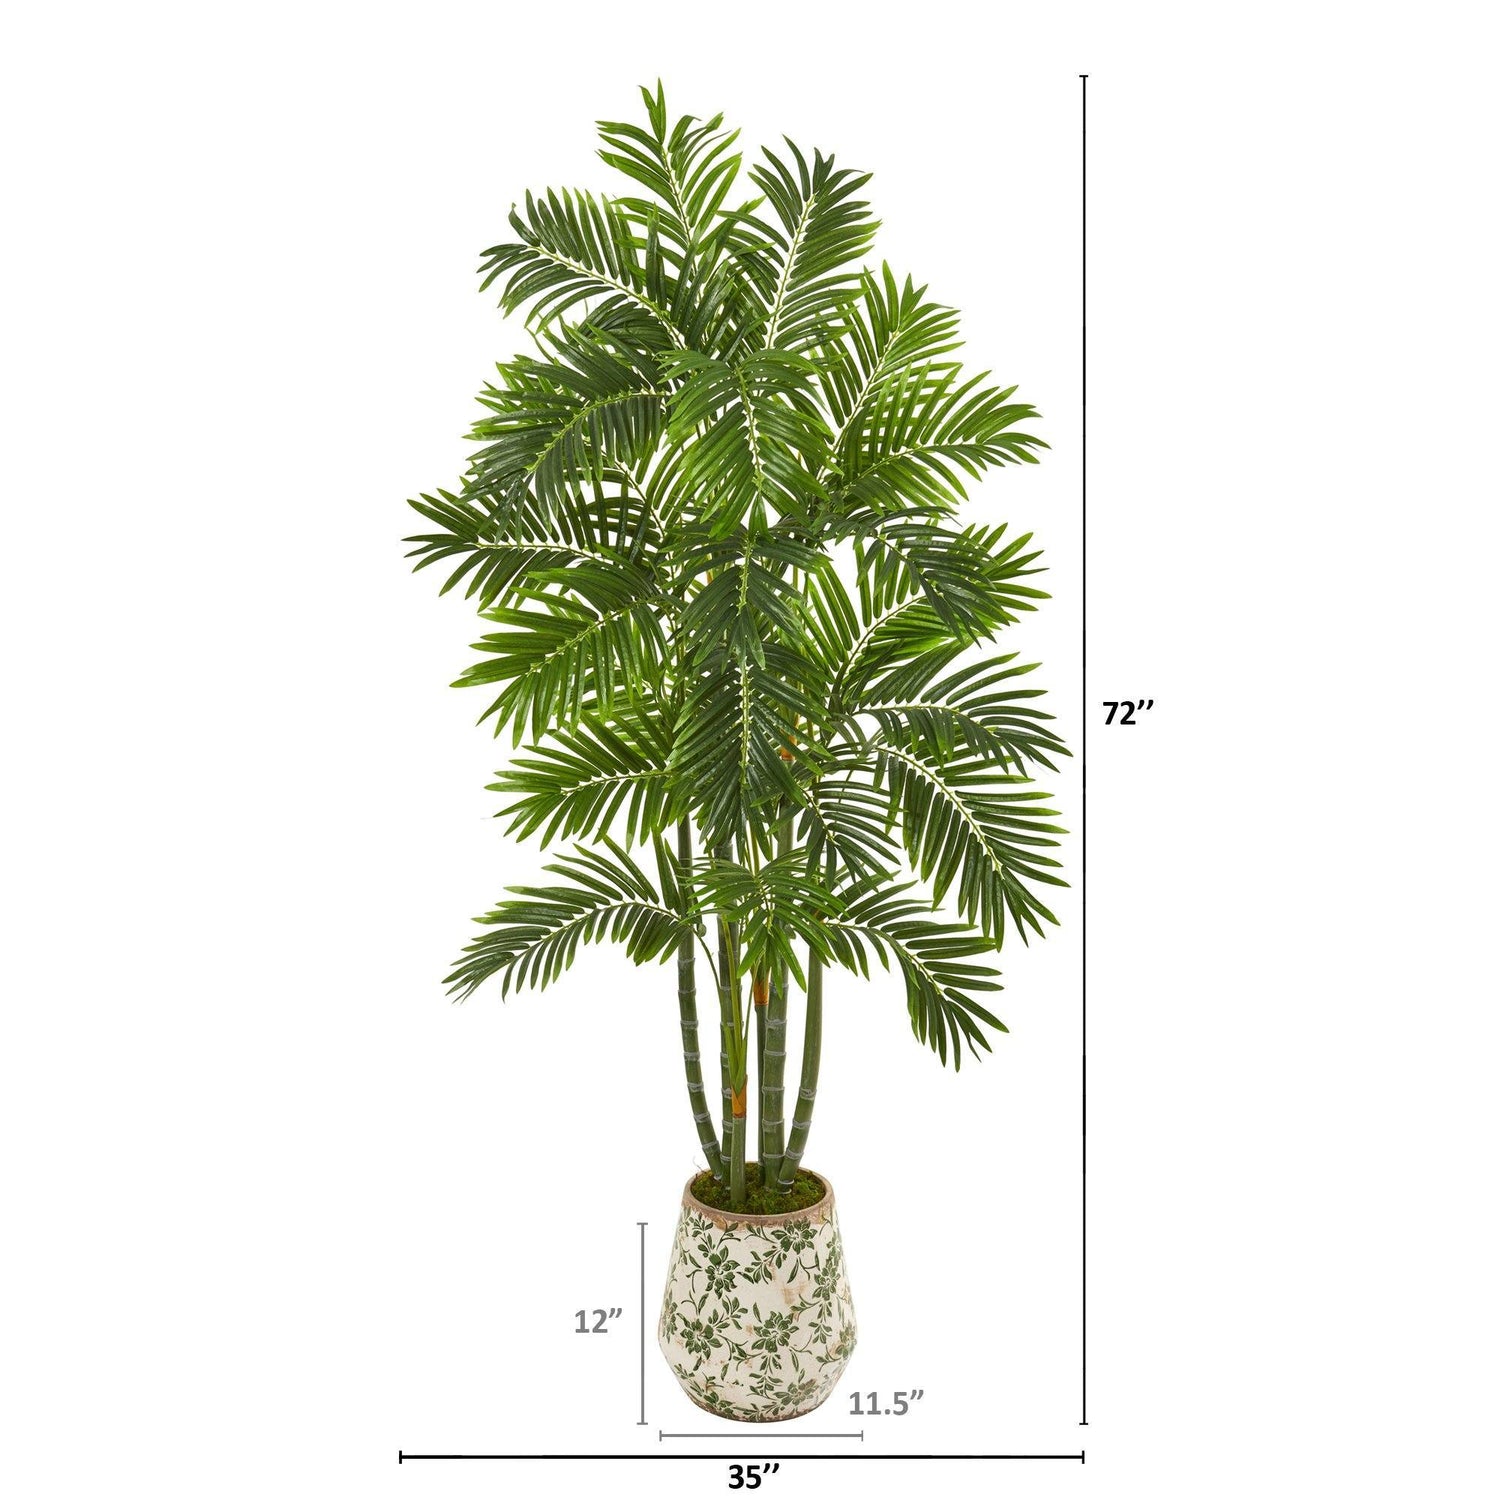 6’ Areca Palm Artificial Tree in Vintage Green Floral Planter